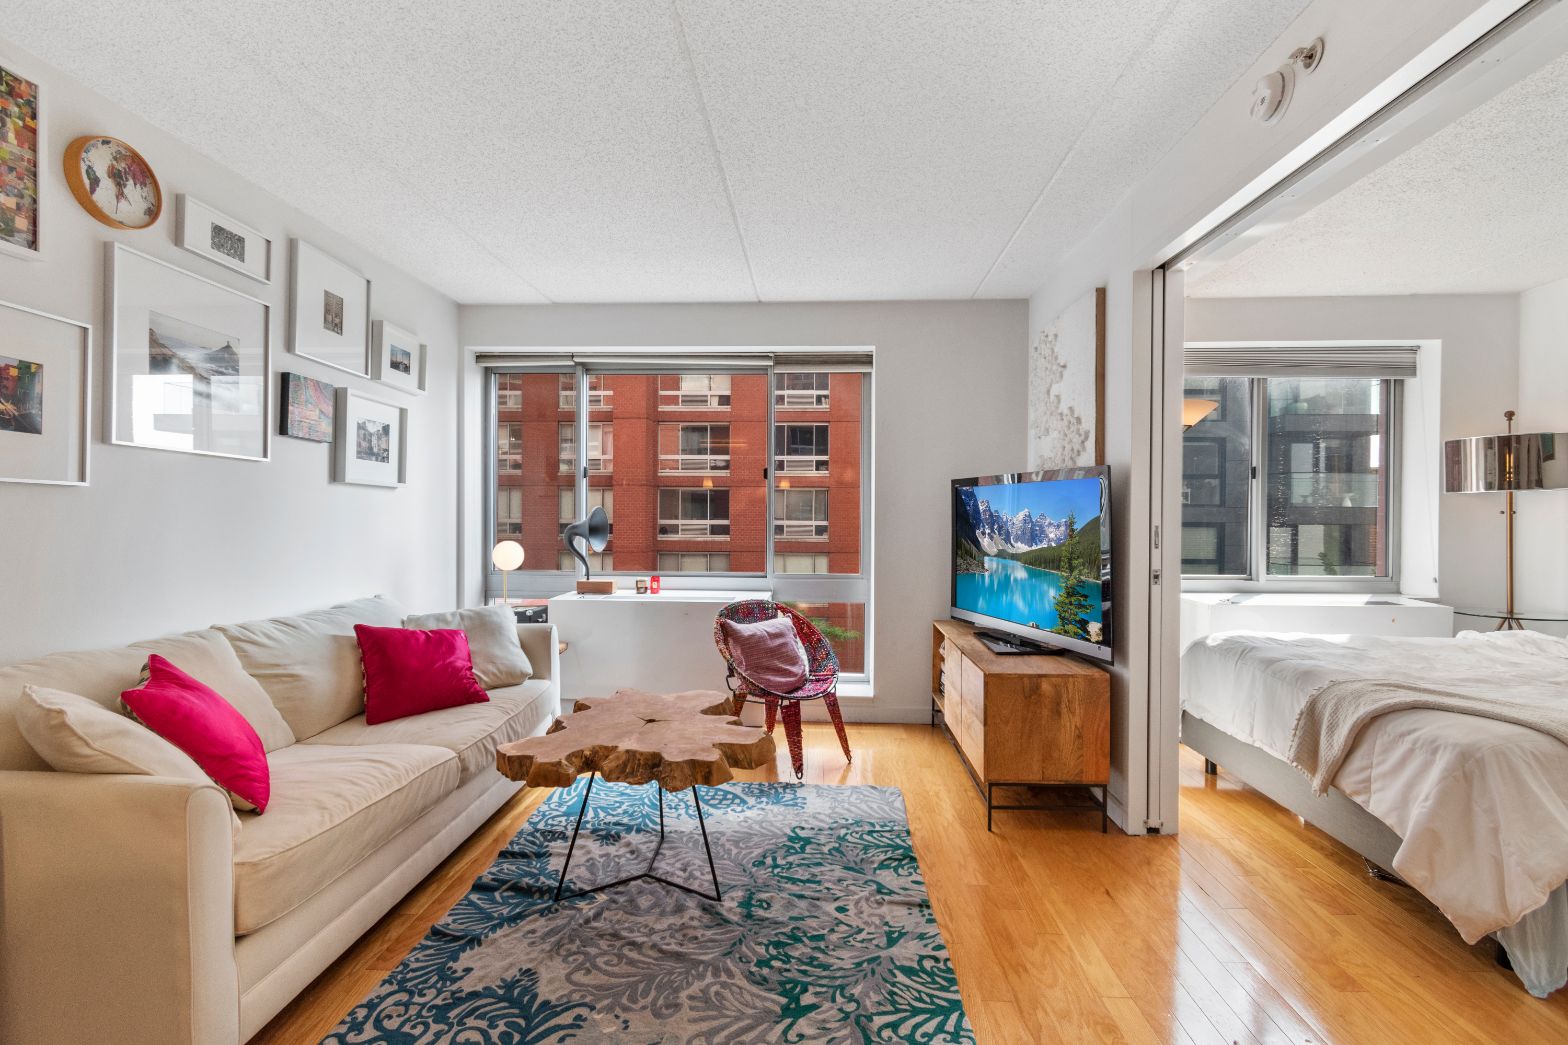 How Much Does a One Bedroom Apartment Cost to Buy in NYC